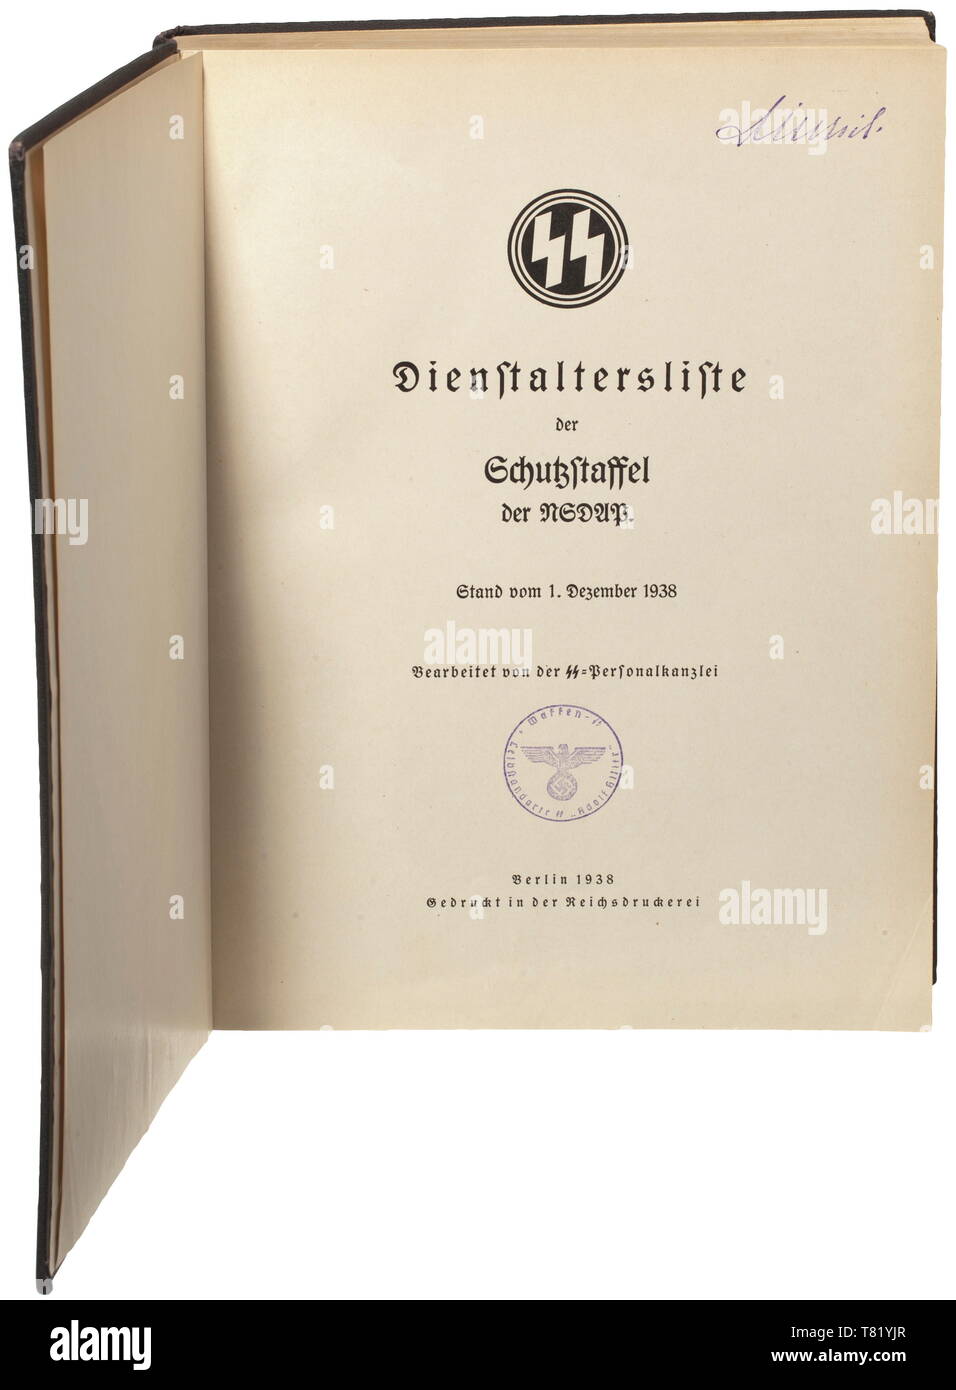 Sepp Dietrich - a Schutzstaffel officer seniority list as of 1 December 1938. Prepared by the personnel office of the Reichsführer-SS. Circa 13,800 officers, listed by service grade (Obergruppenführer to Untersturmführer) with information on official position, party- and SS numbers, birth date, date of each promotion, Totenkopf Ring award, Reichsführer Honour Sword award, Blood Order etc. Included is a listing of those officers who were trained at Führer schools, had dropped out or were expelled. Black cover with stamped white runes and lettering. Flyleaf with inventory sta, Editorial-Use-Only Stock Photo